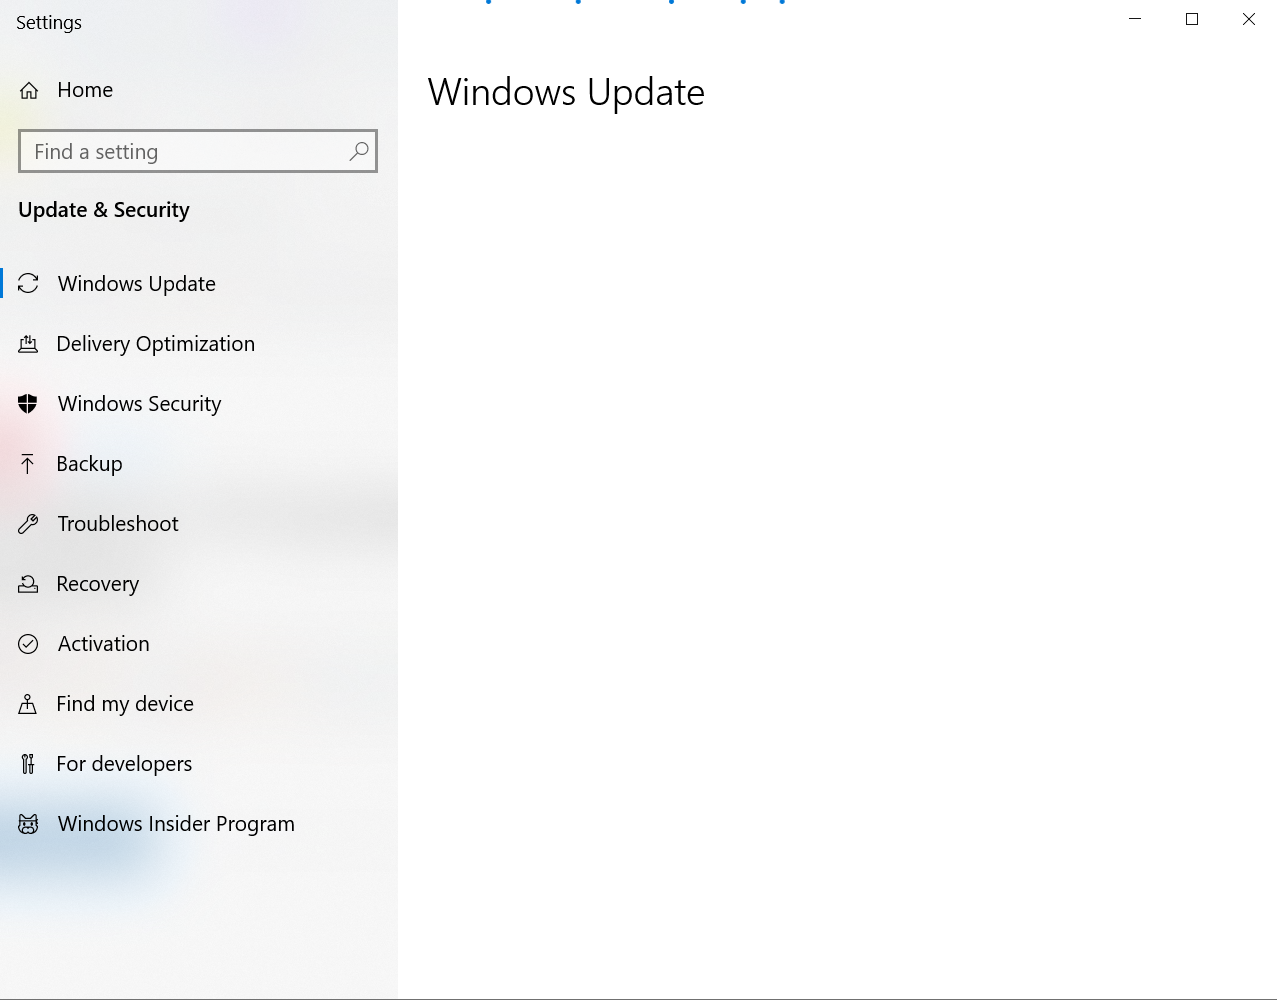 Windows 10 Update Stuck at Checking for Updates 3f849968-98ab-4e83-9e02-fe77fa9fbbf8?upload=true.png